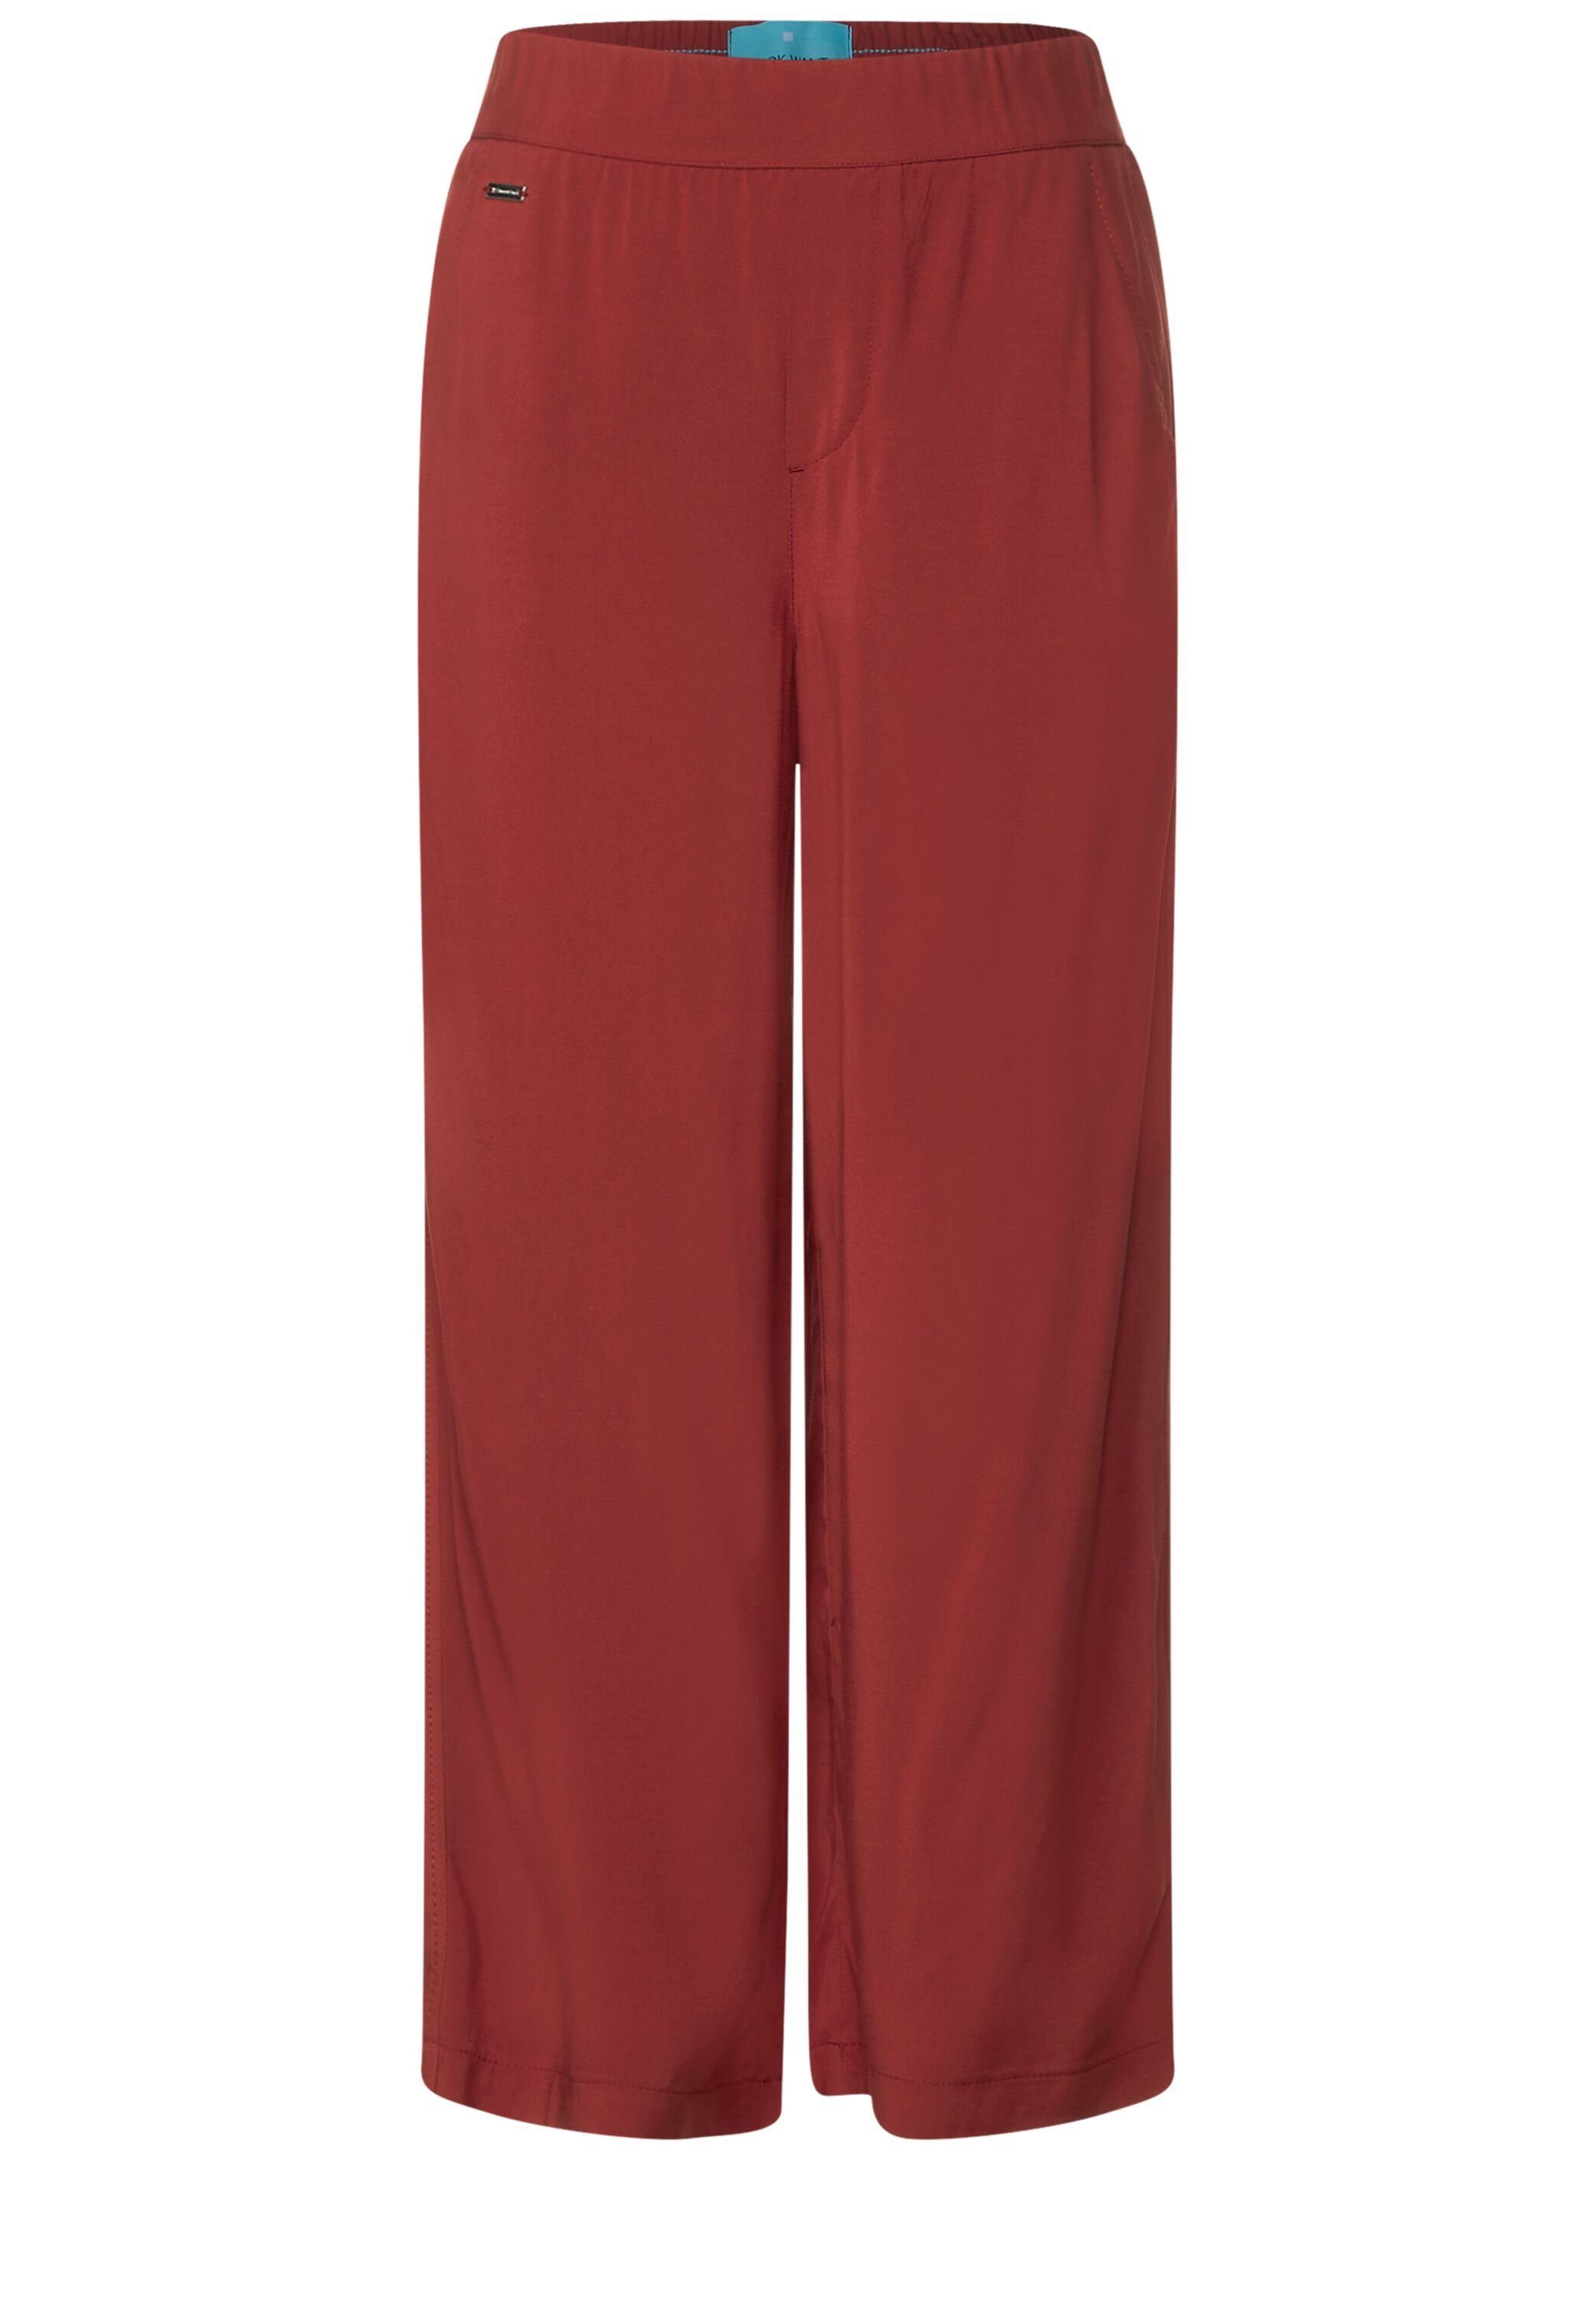 STREET ONE Culotte foxy red